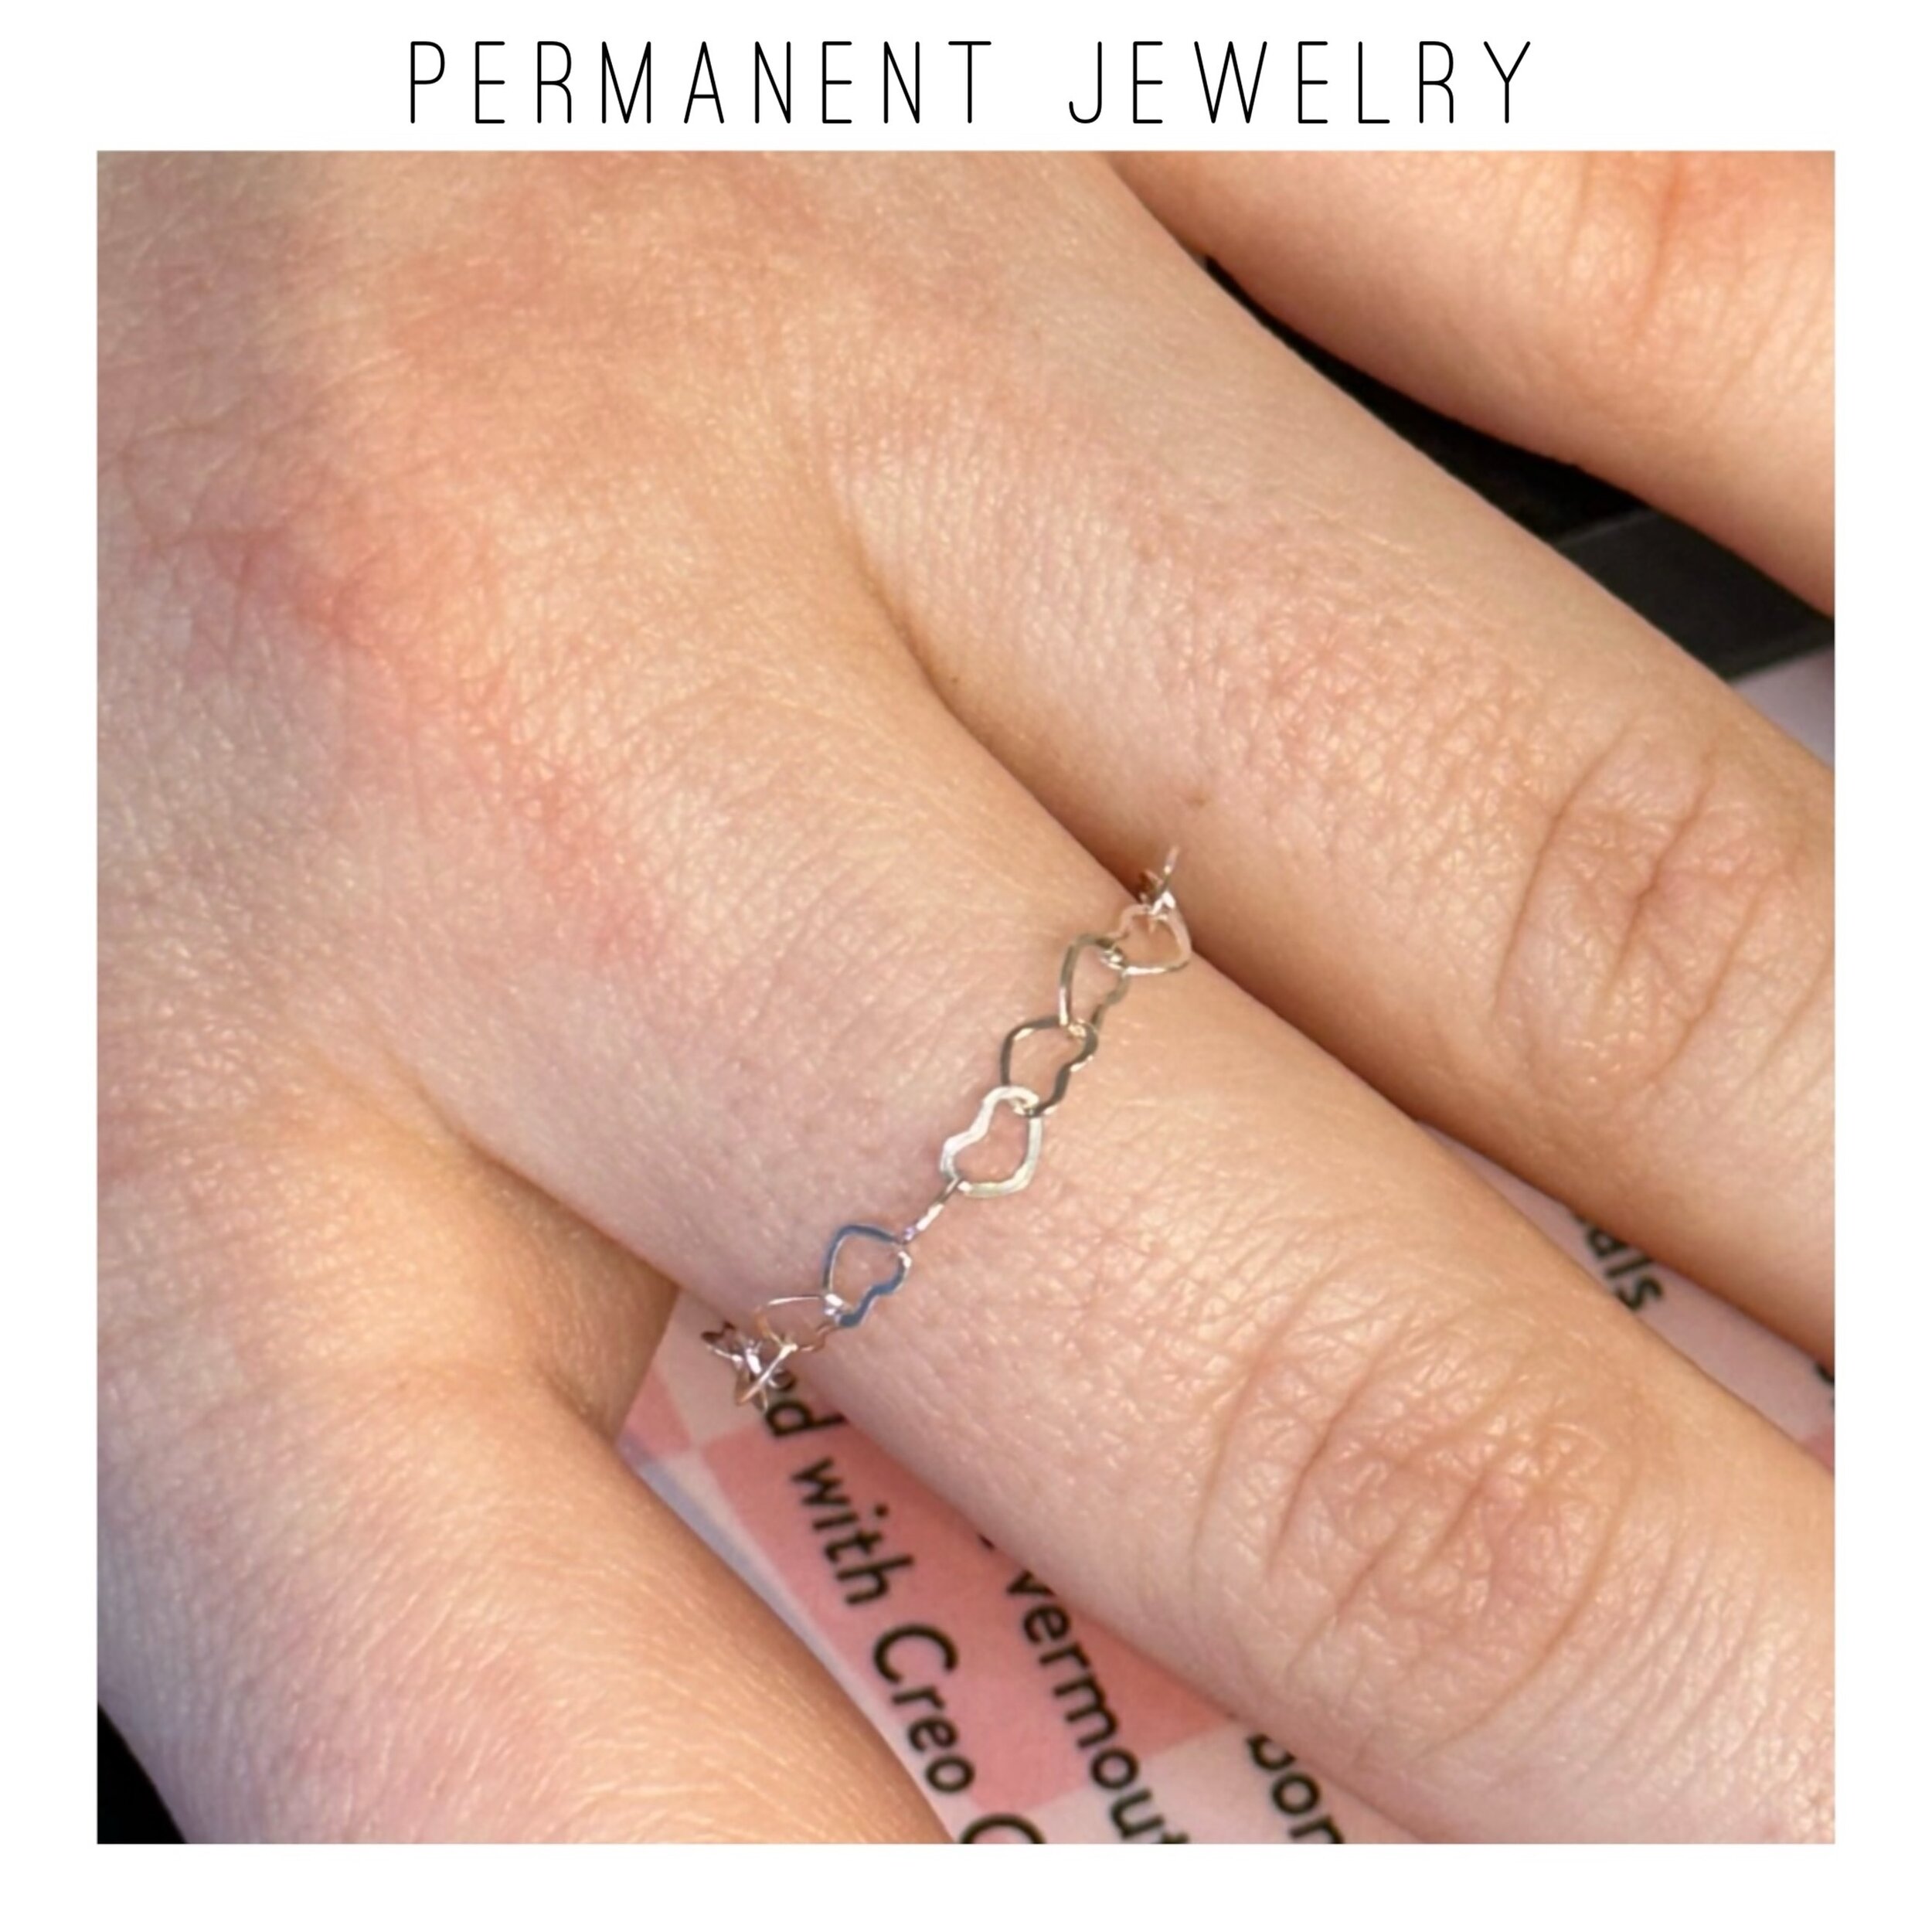 We&rsquo;re obsessed with the bonded jewelry movement! Come get a sweet little ring. #permanentjewelry #permanentjewelrypdx #bondedjewelrypdx #portlandlashes #lashliftpdx #iplpdx #laserhairremovalpdx #botoxpdx #beautyrulepdx #thebeautycollectivepdx